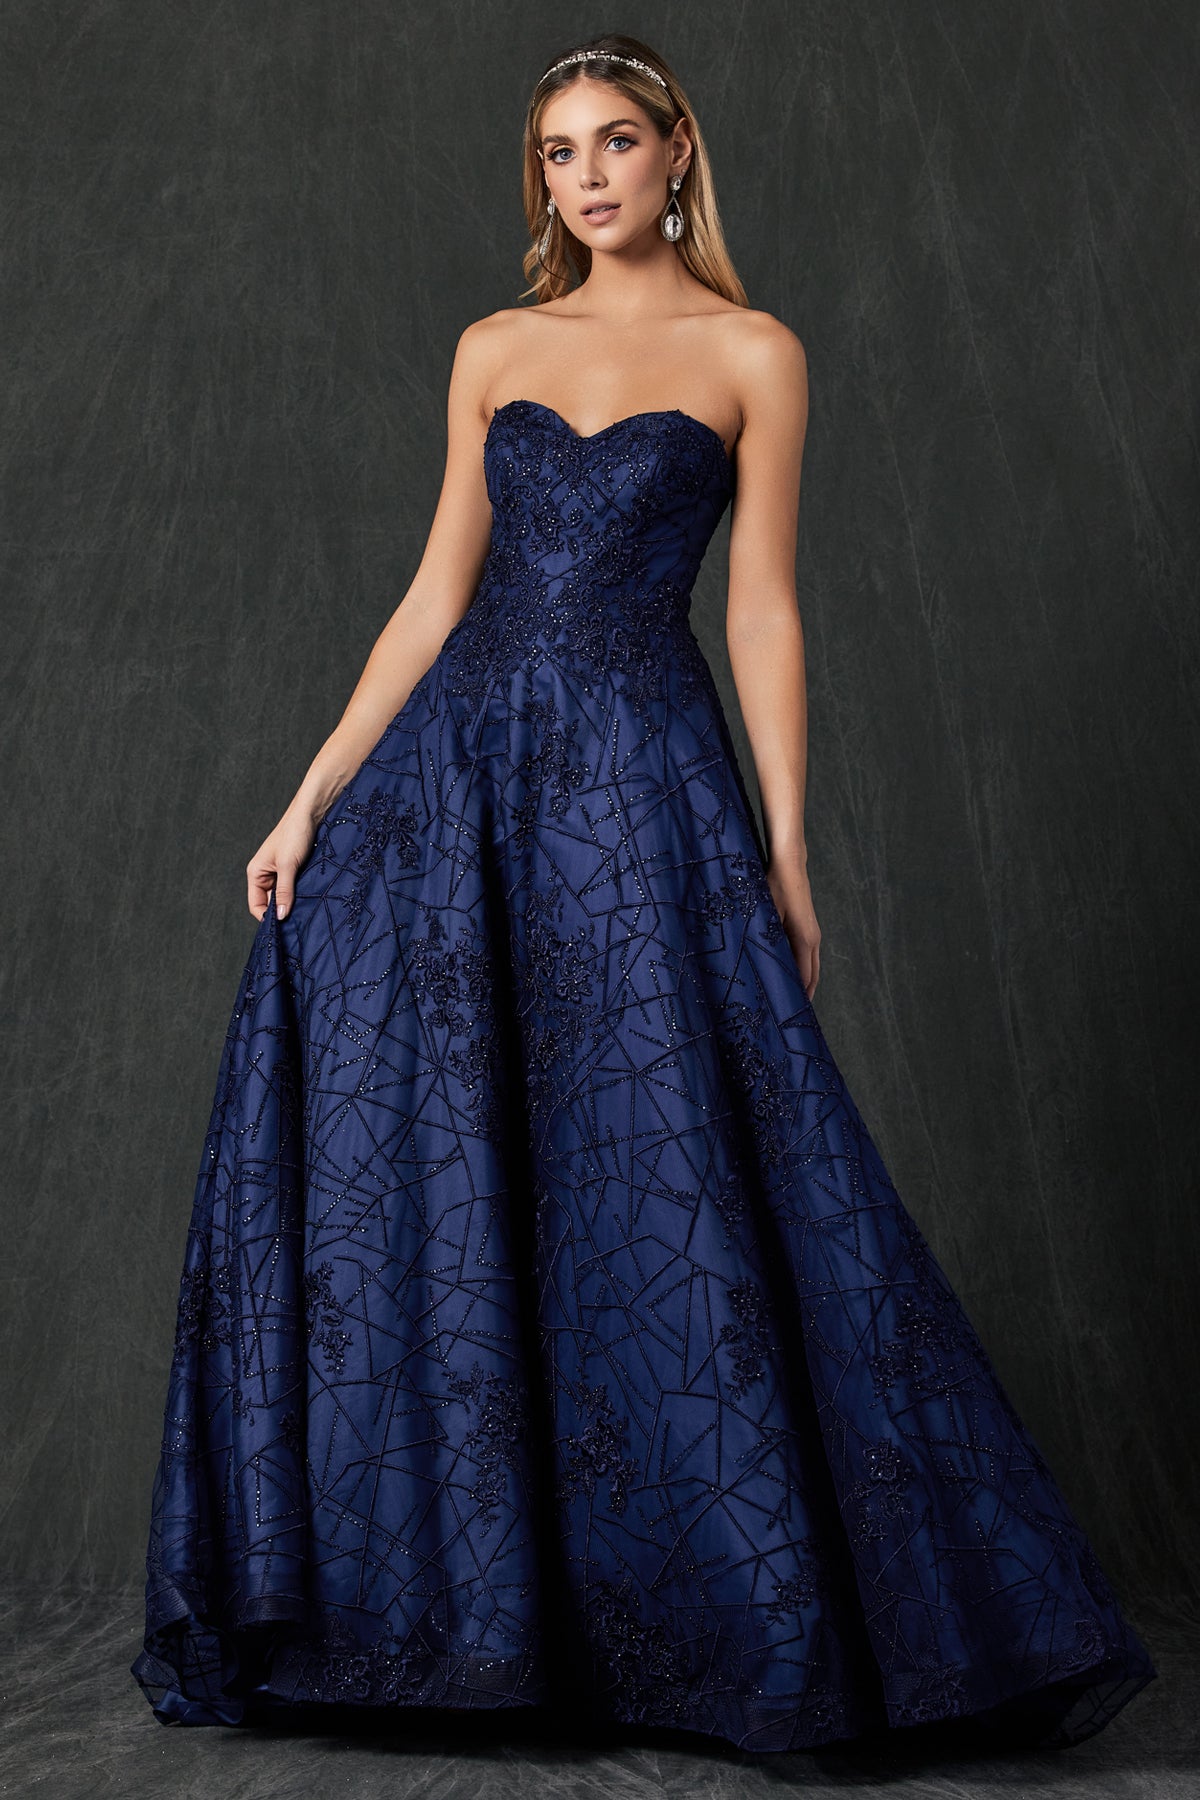 embroidered-long-strapless-dress-by-juli